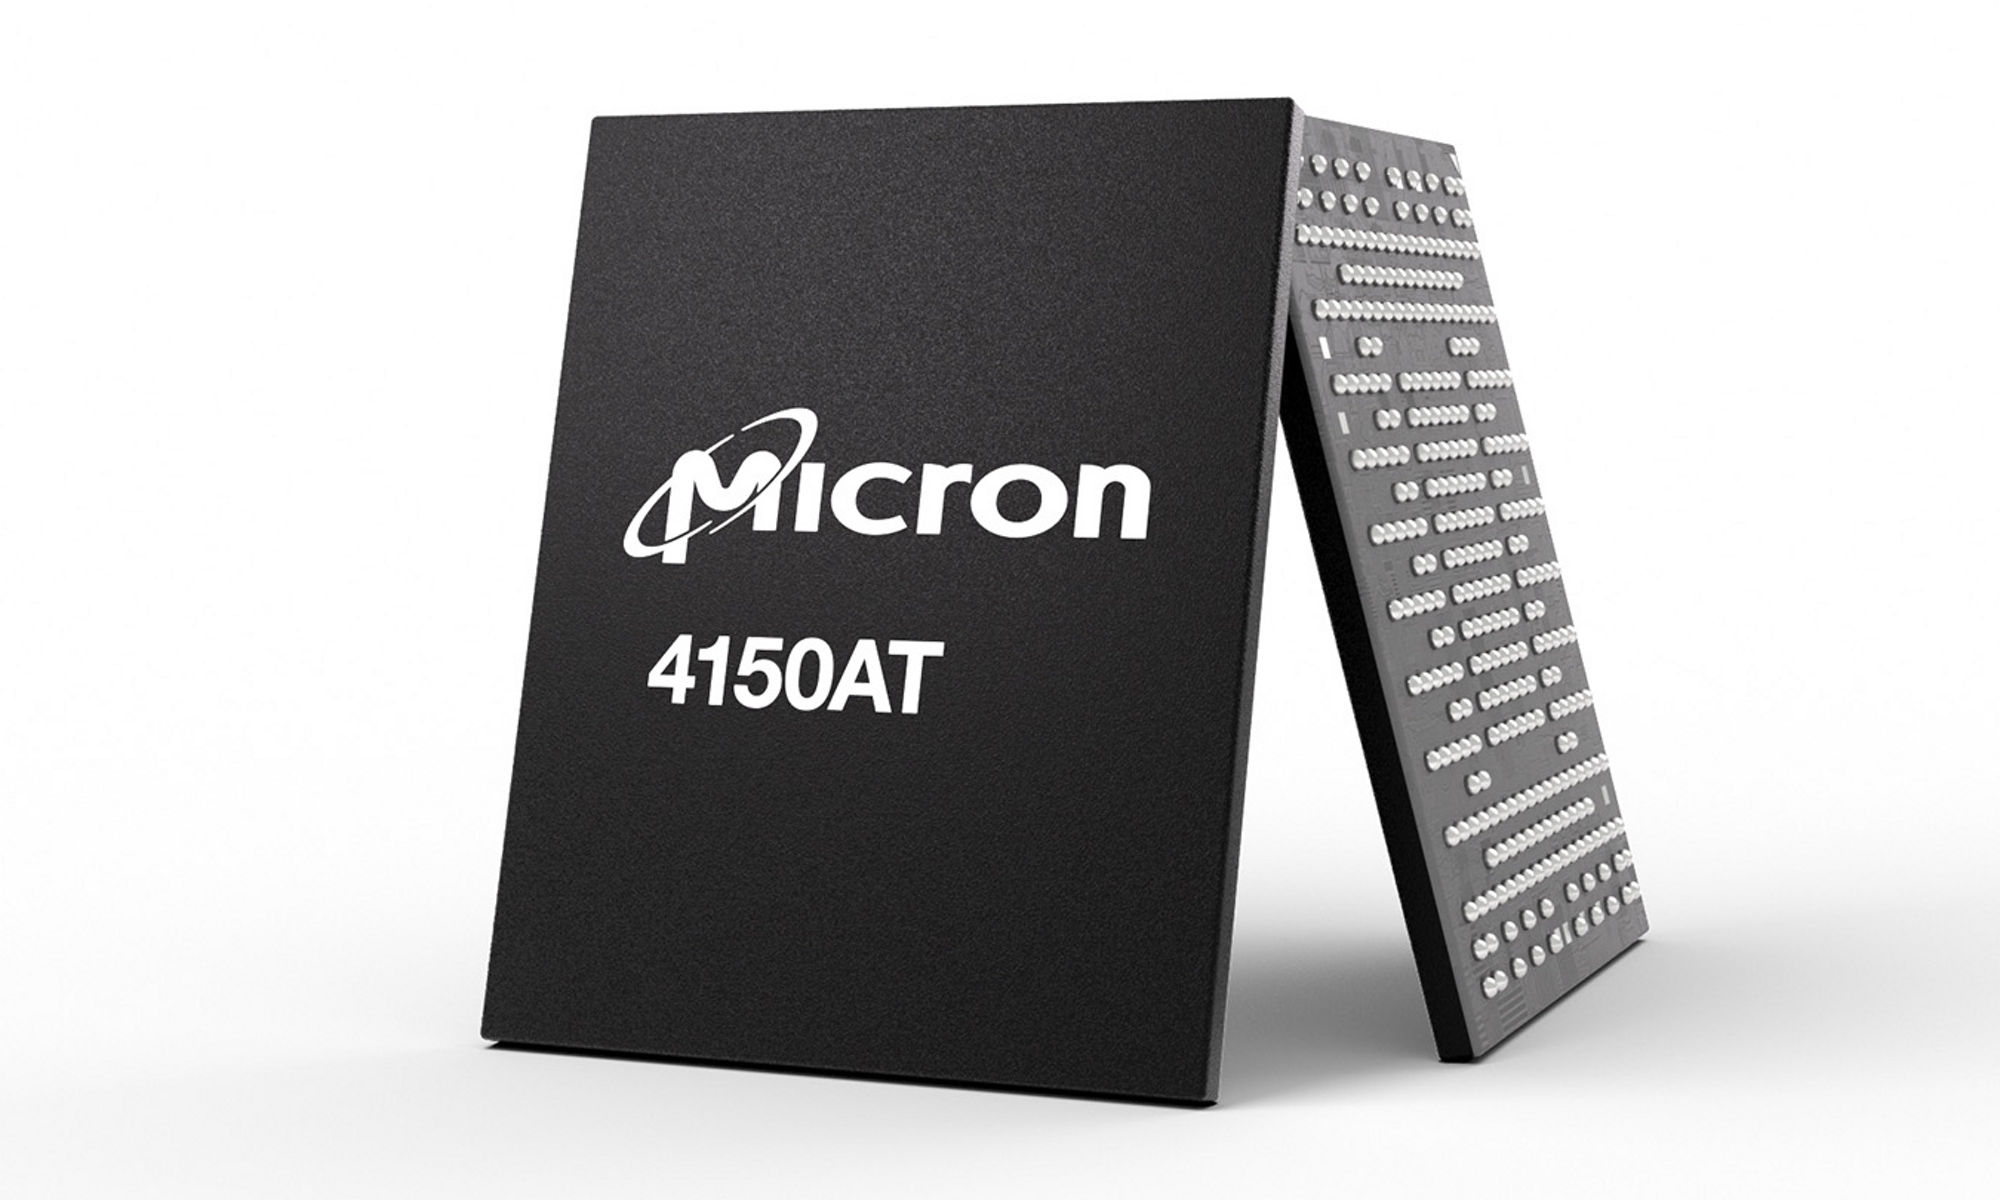 Micron 4150AT SSD front and back